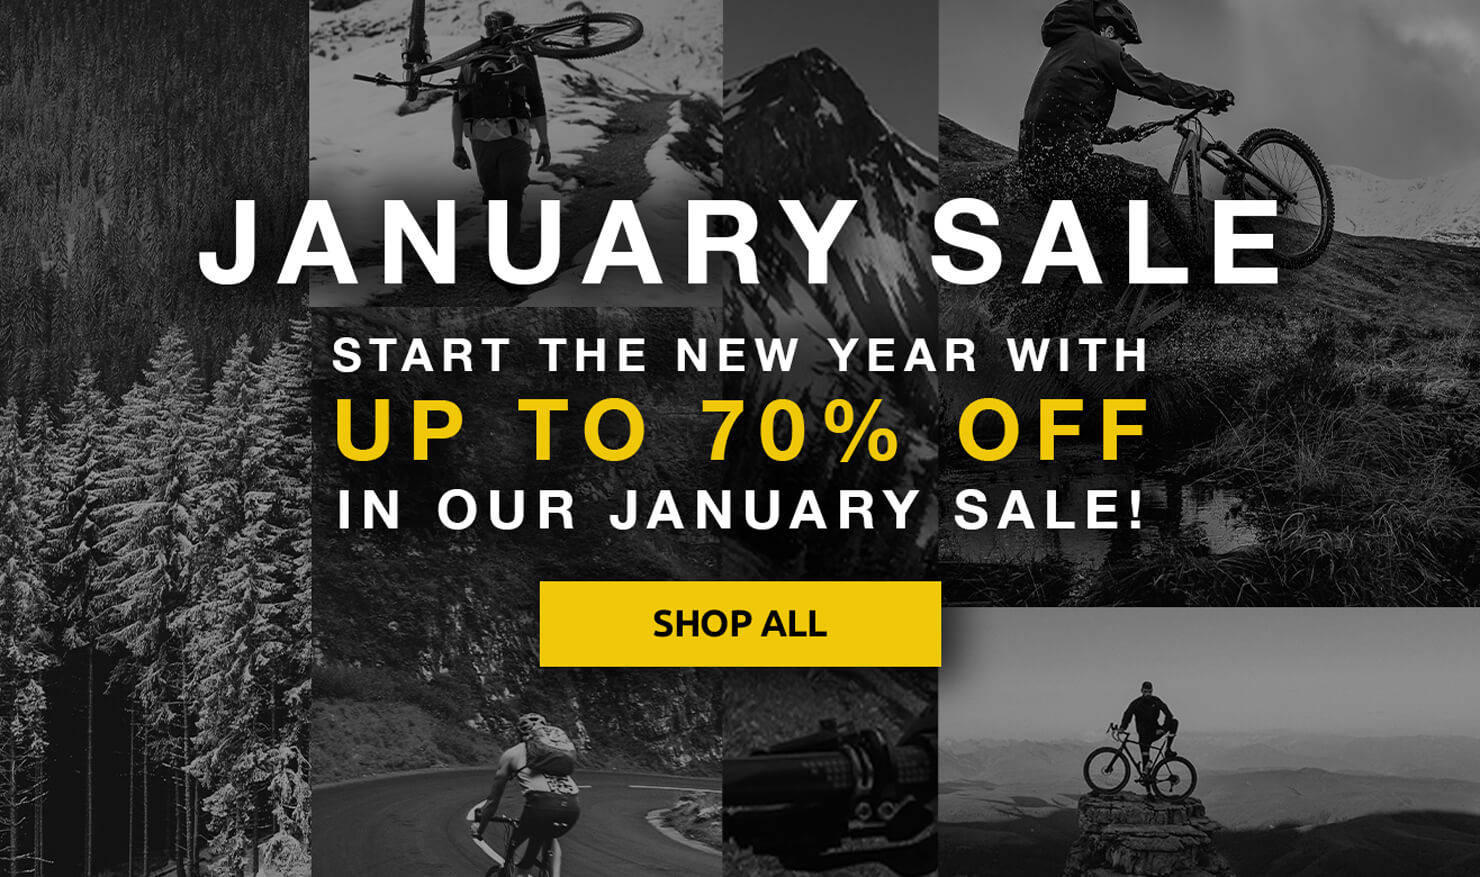 Start the new year with up to 70% in our January Sale!